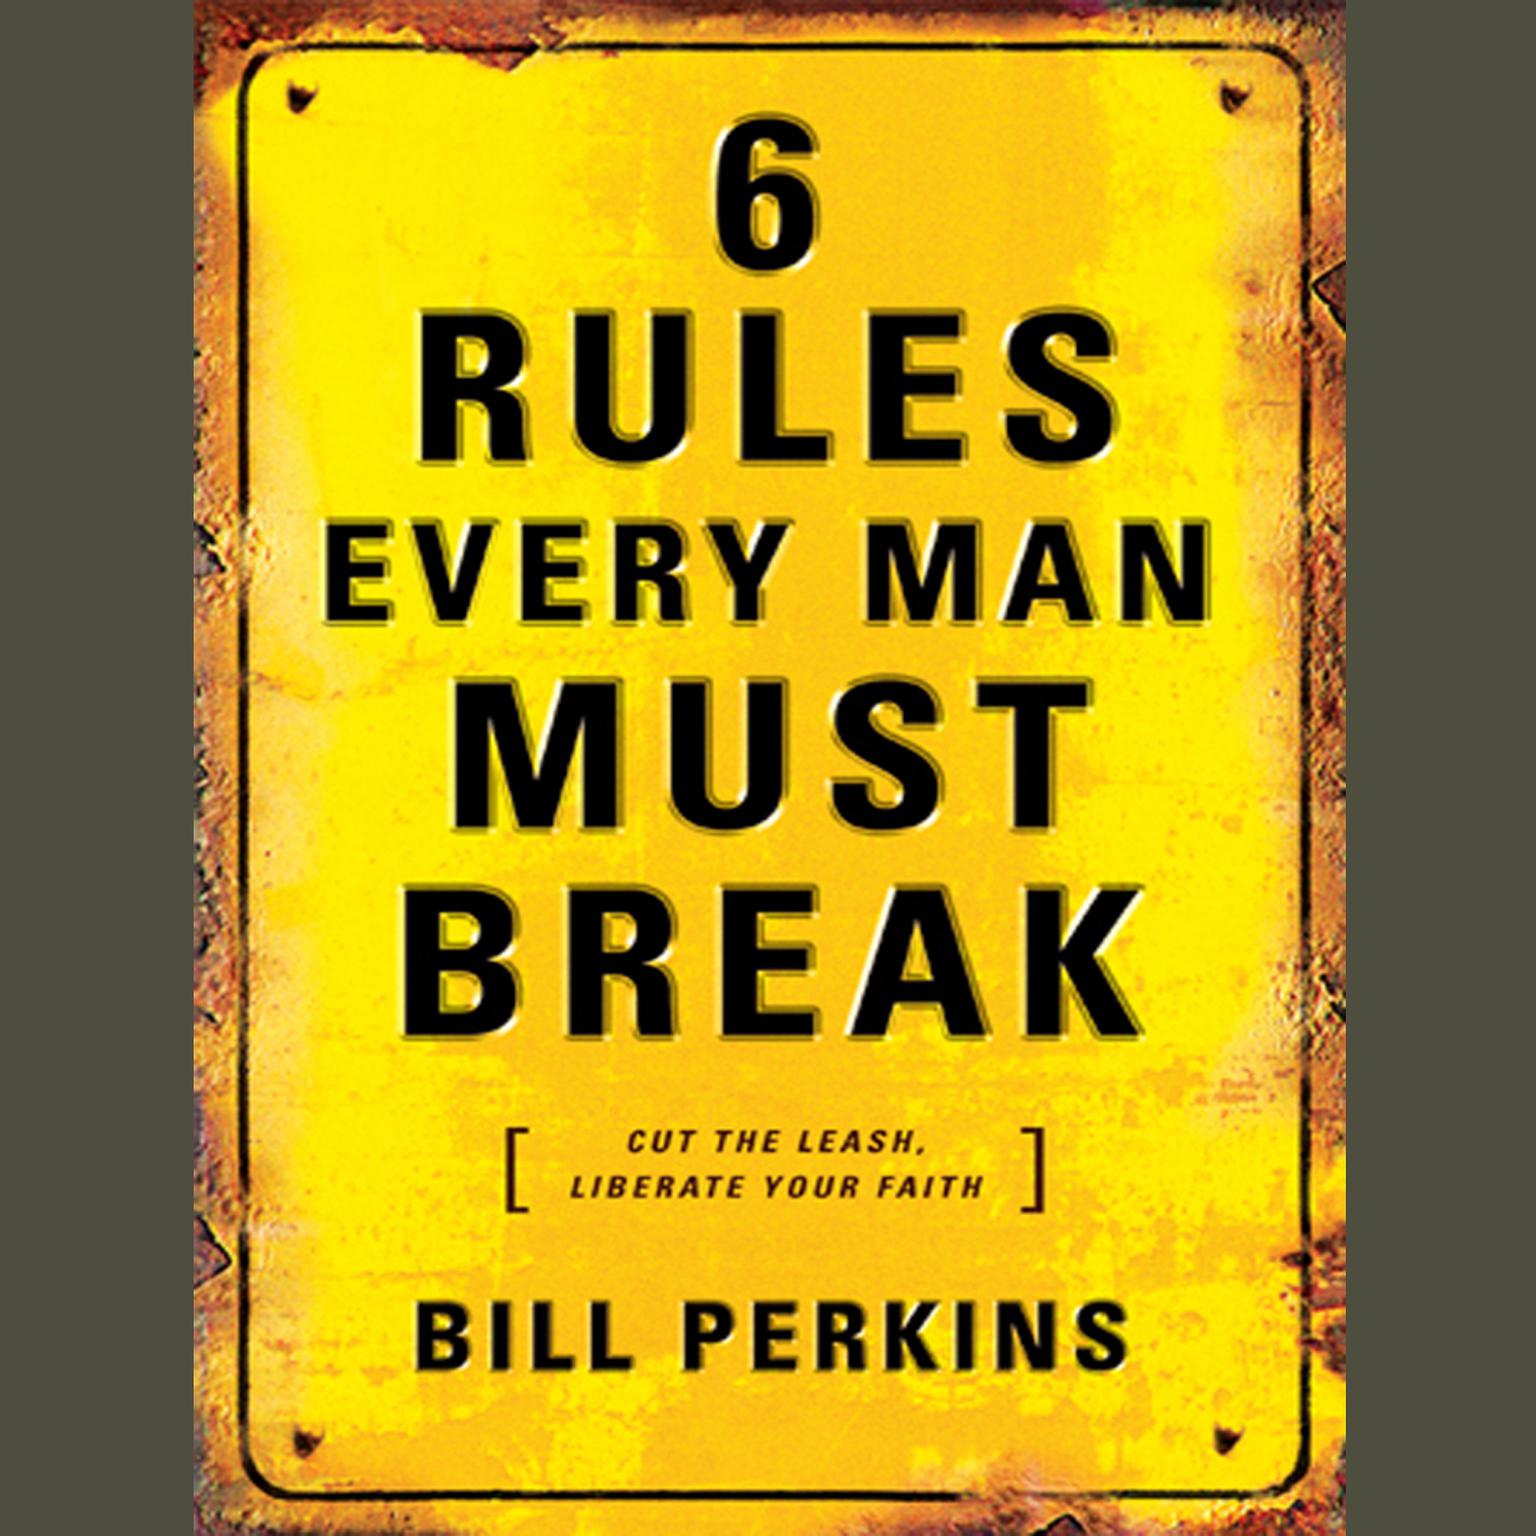 6 Rules Every Man Must Break: Cut the Leash, Liberate Your Faith Audiobook, by Bill Perkins